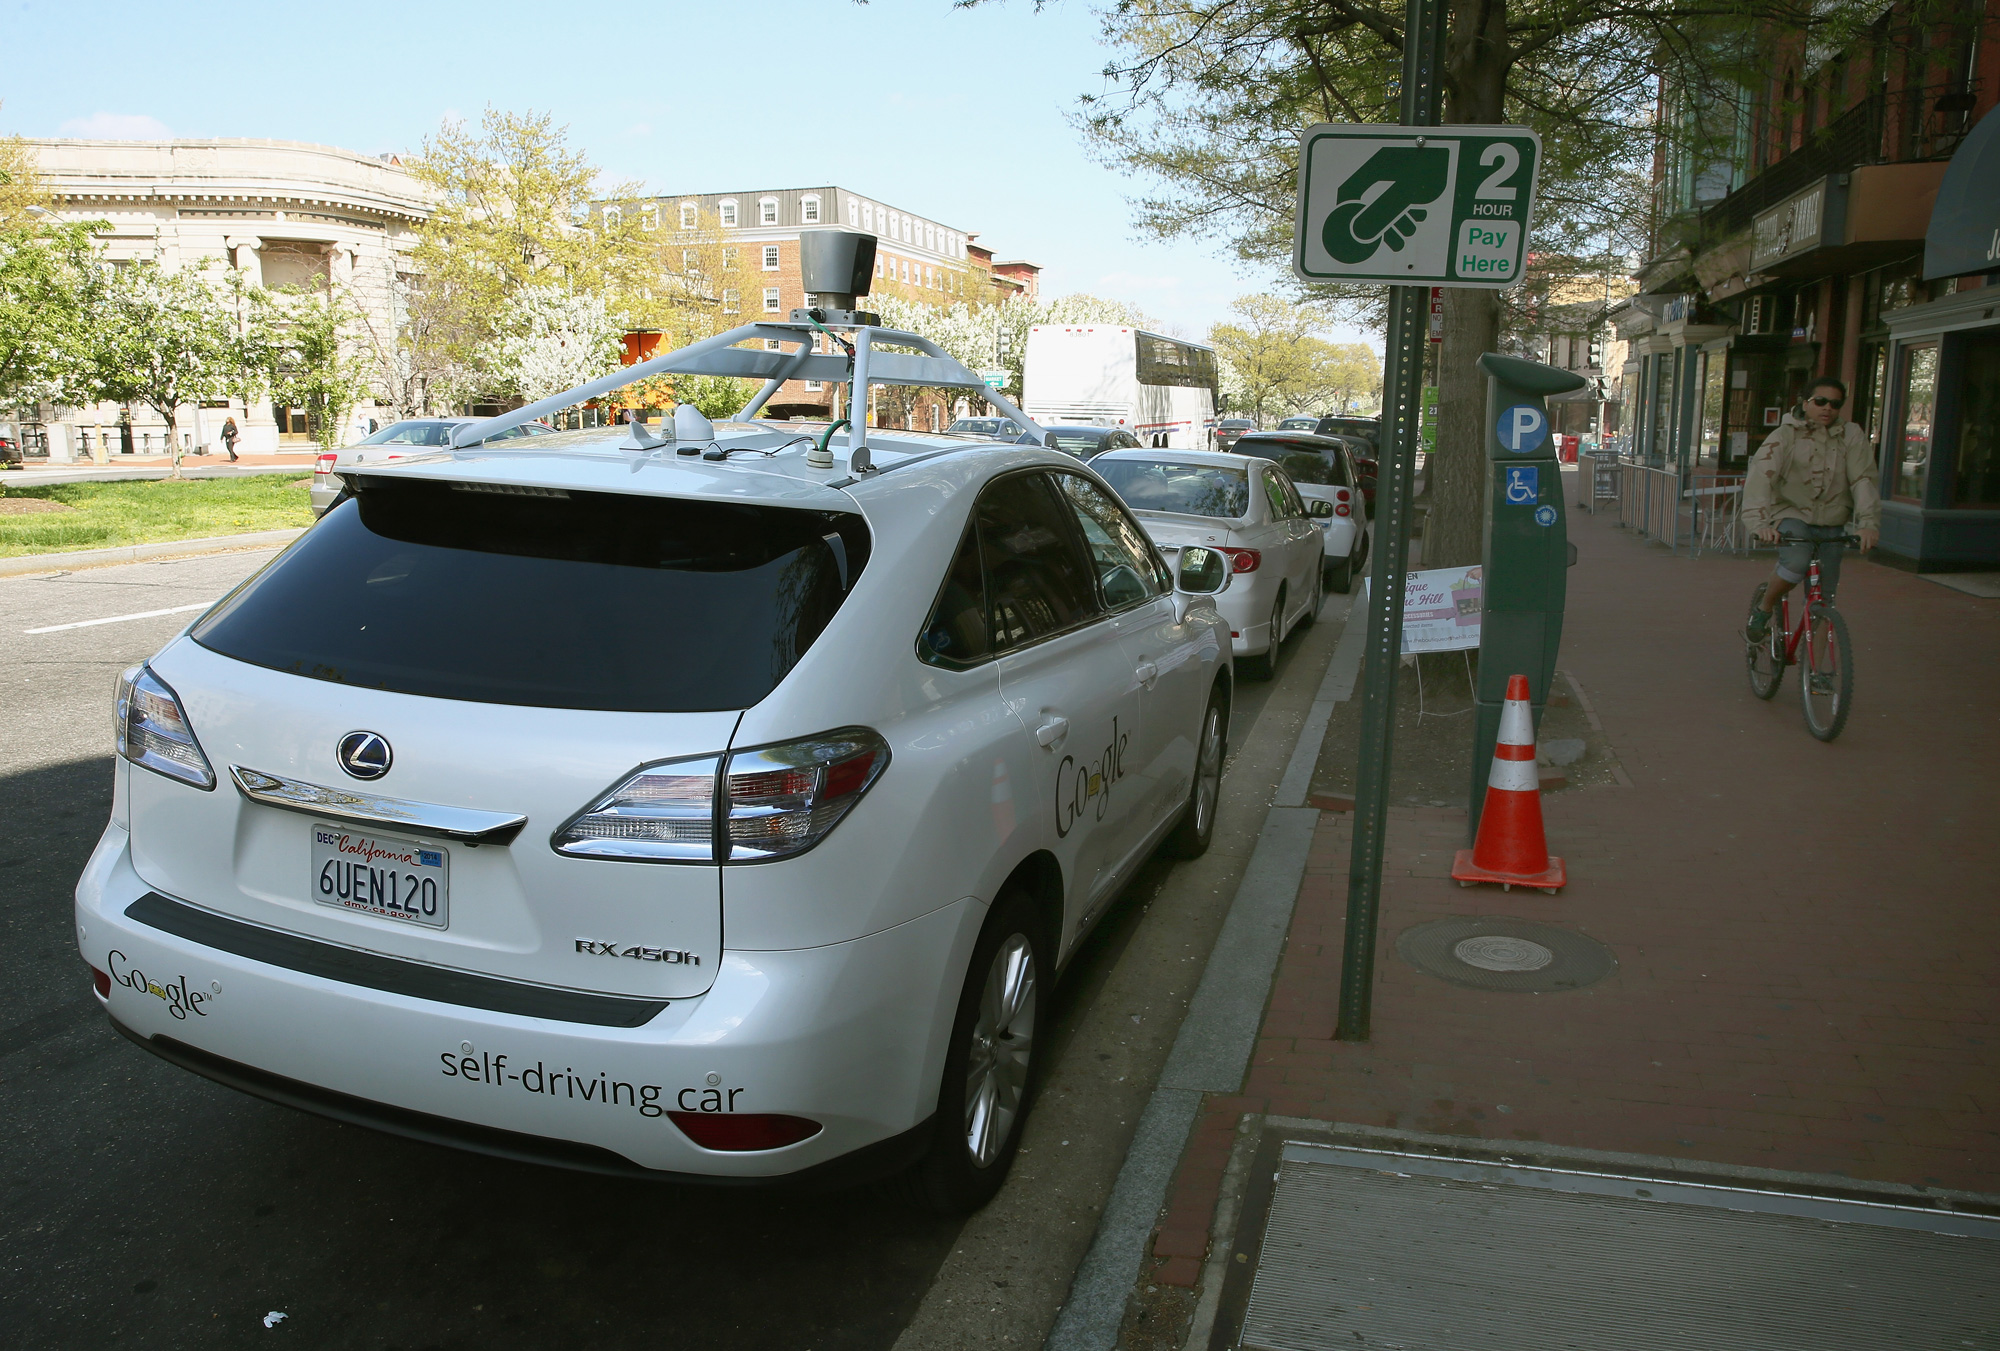 If you want to make a driverless car stop, just drive right in front of it.